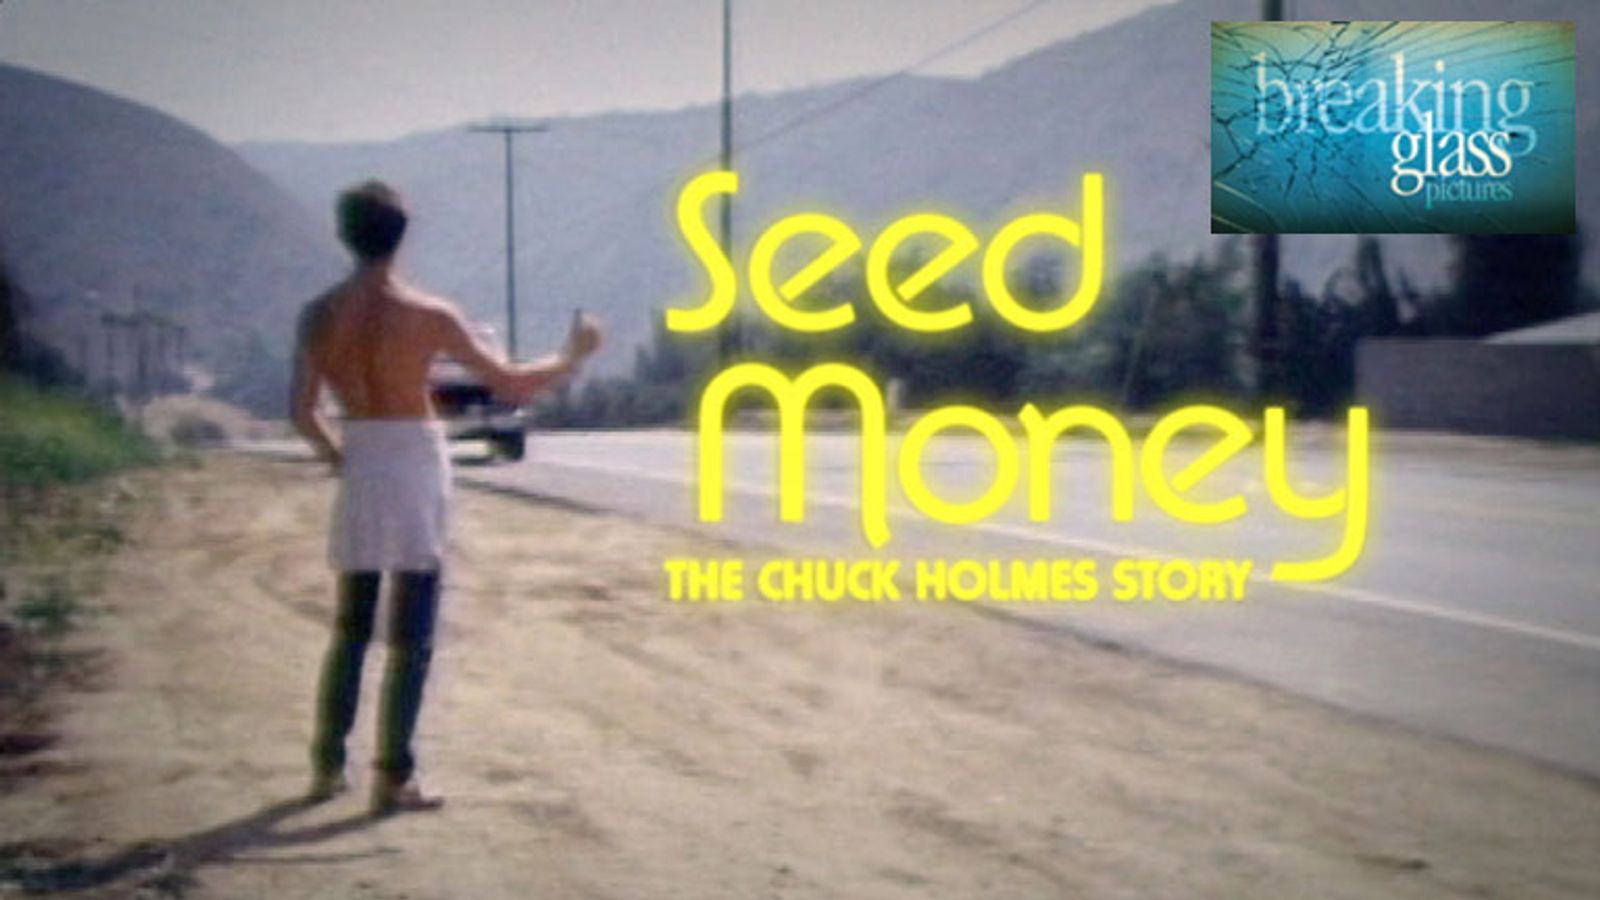 Falcon Studios Kicks Off 45th Anniversary with 'Seed Money' Screening to Benefit 'No on 60'